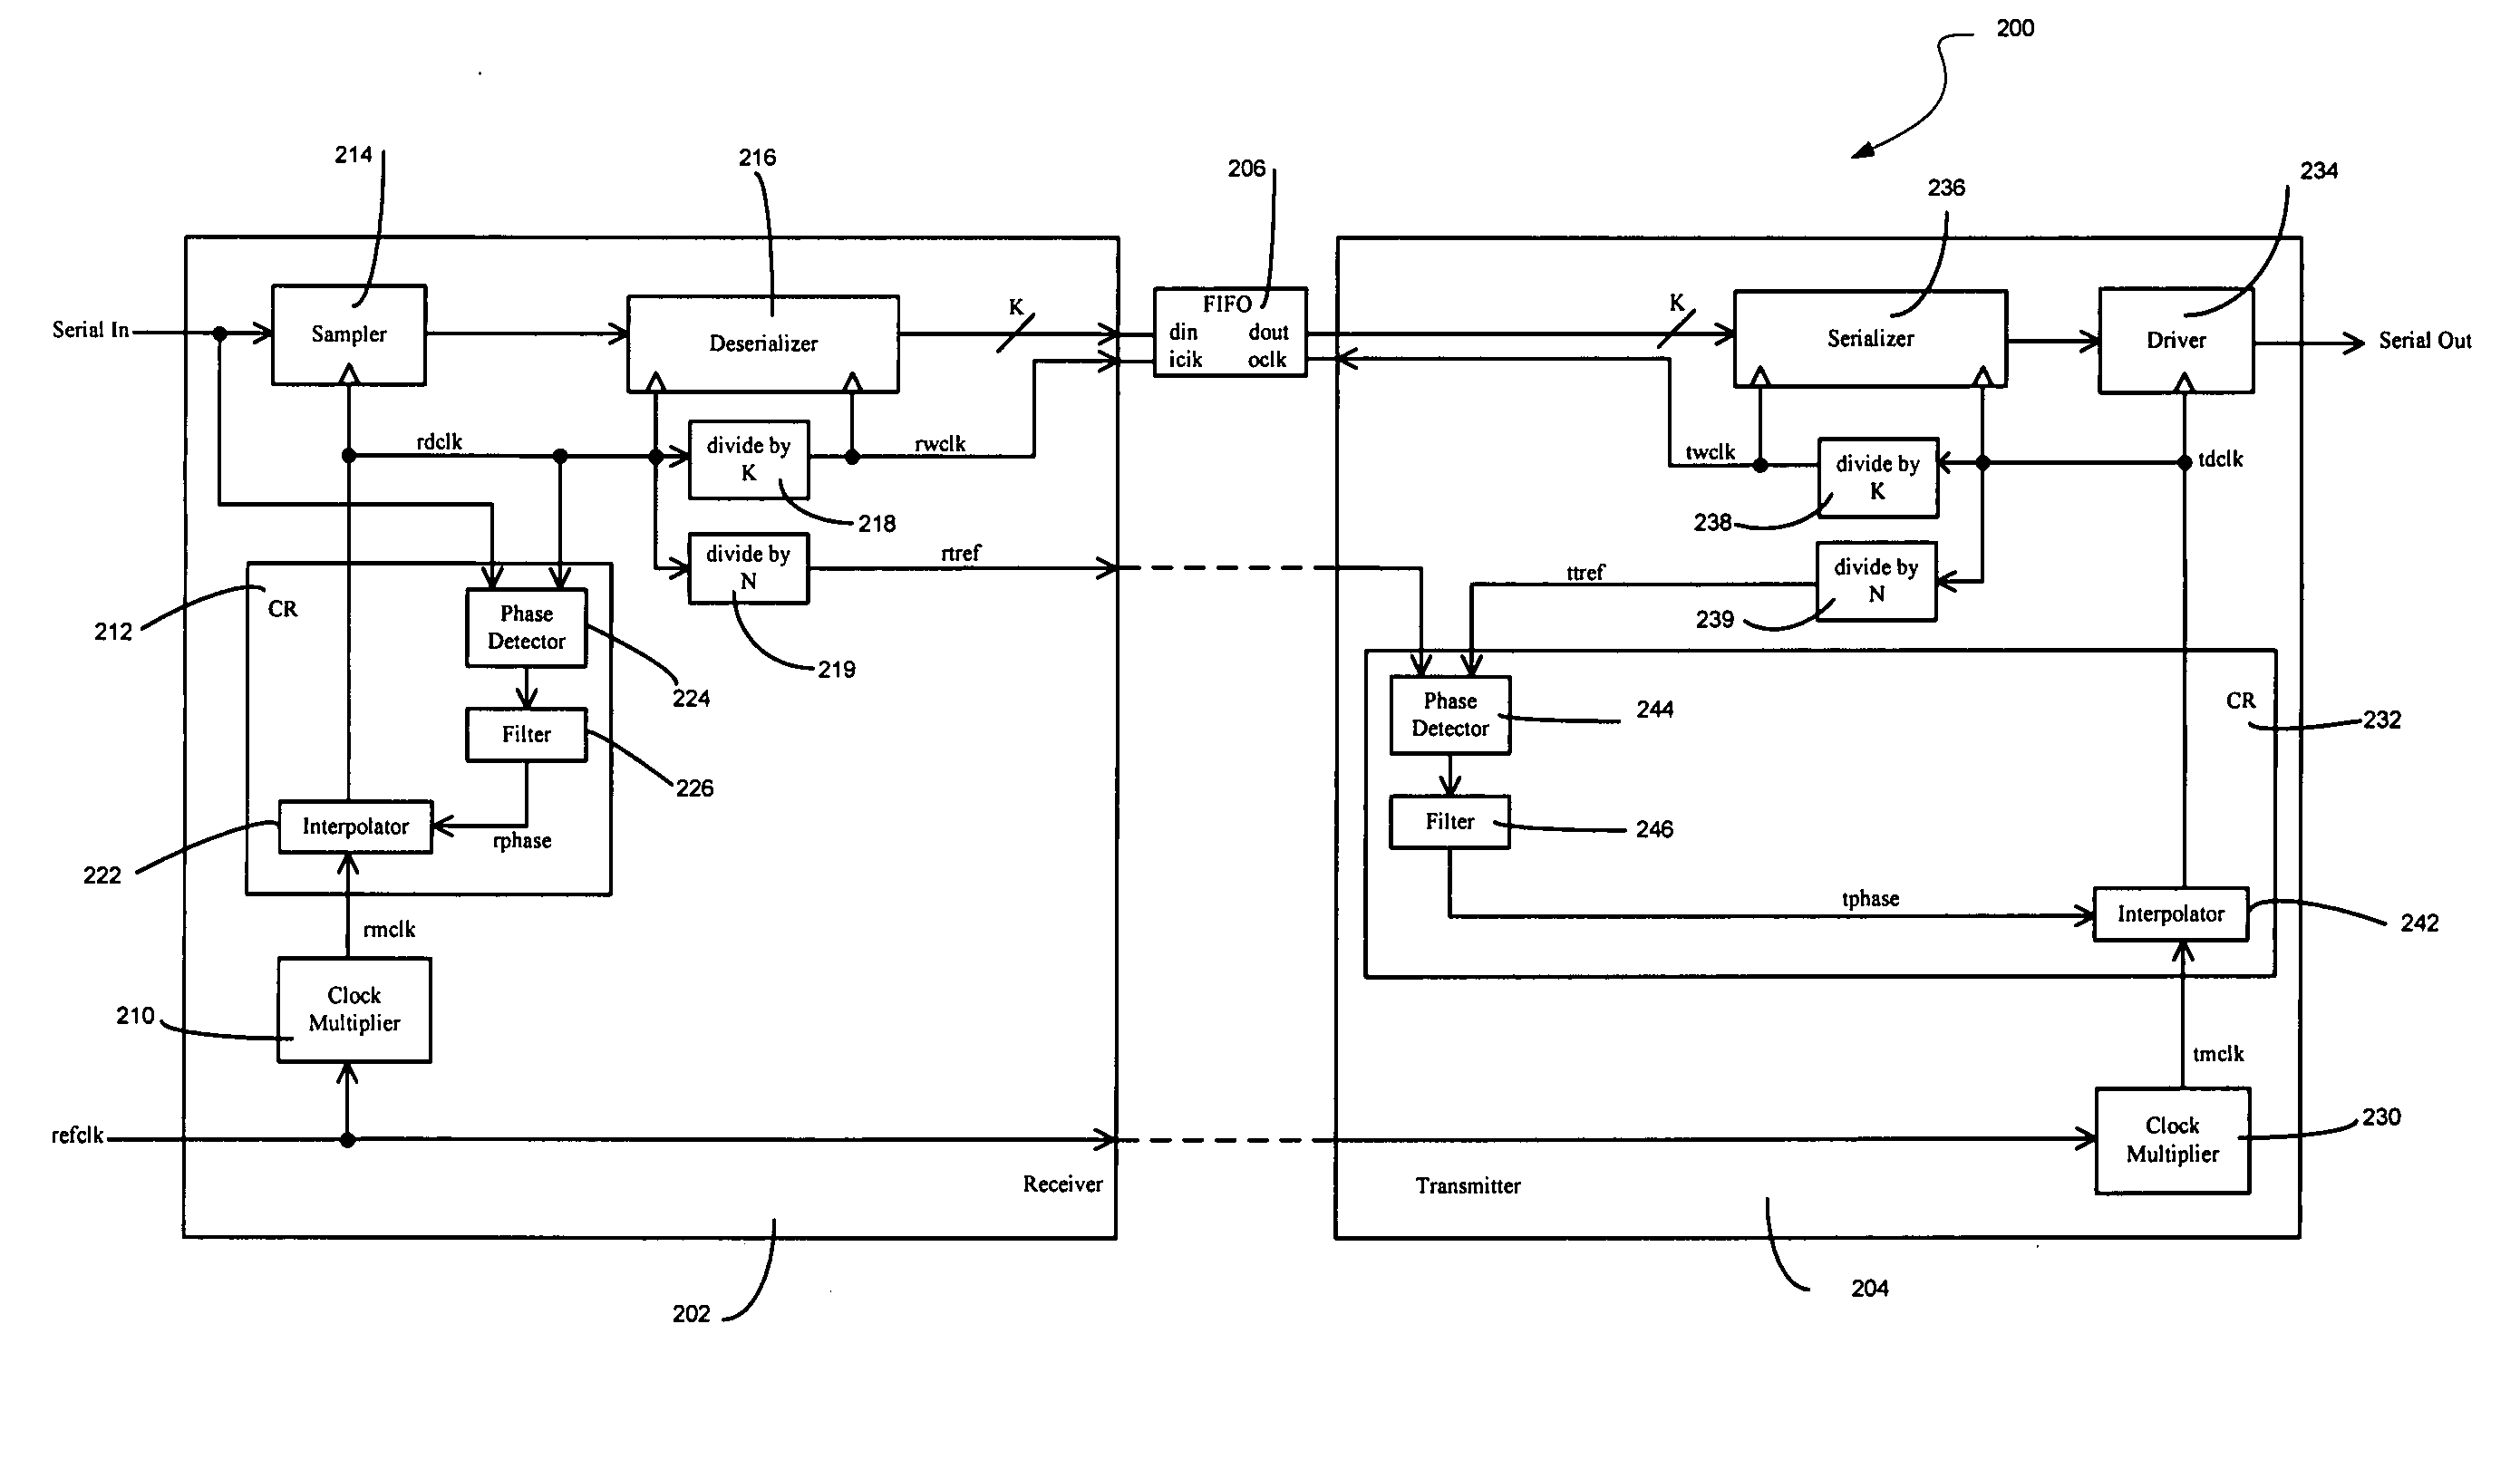 Pleisiochronous repeater system and components thereof